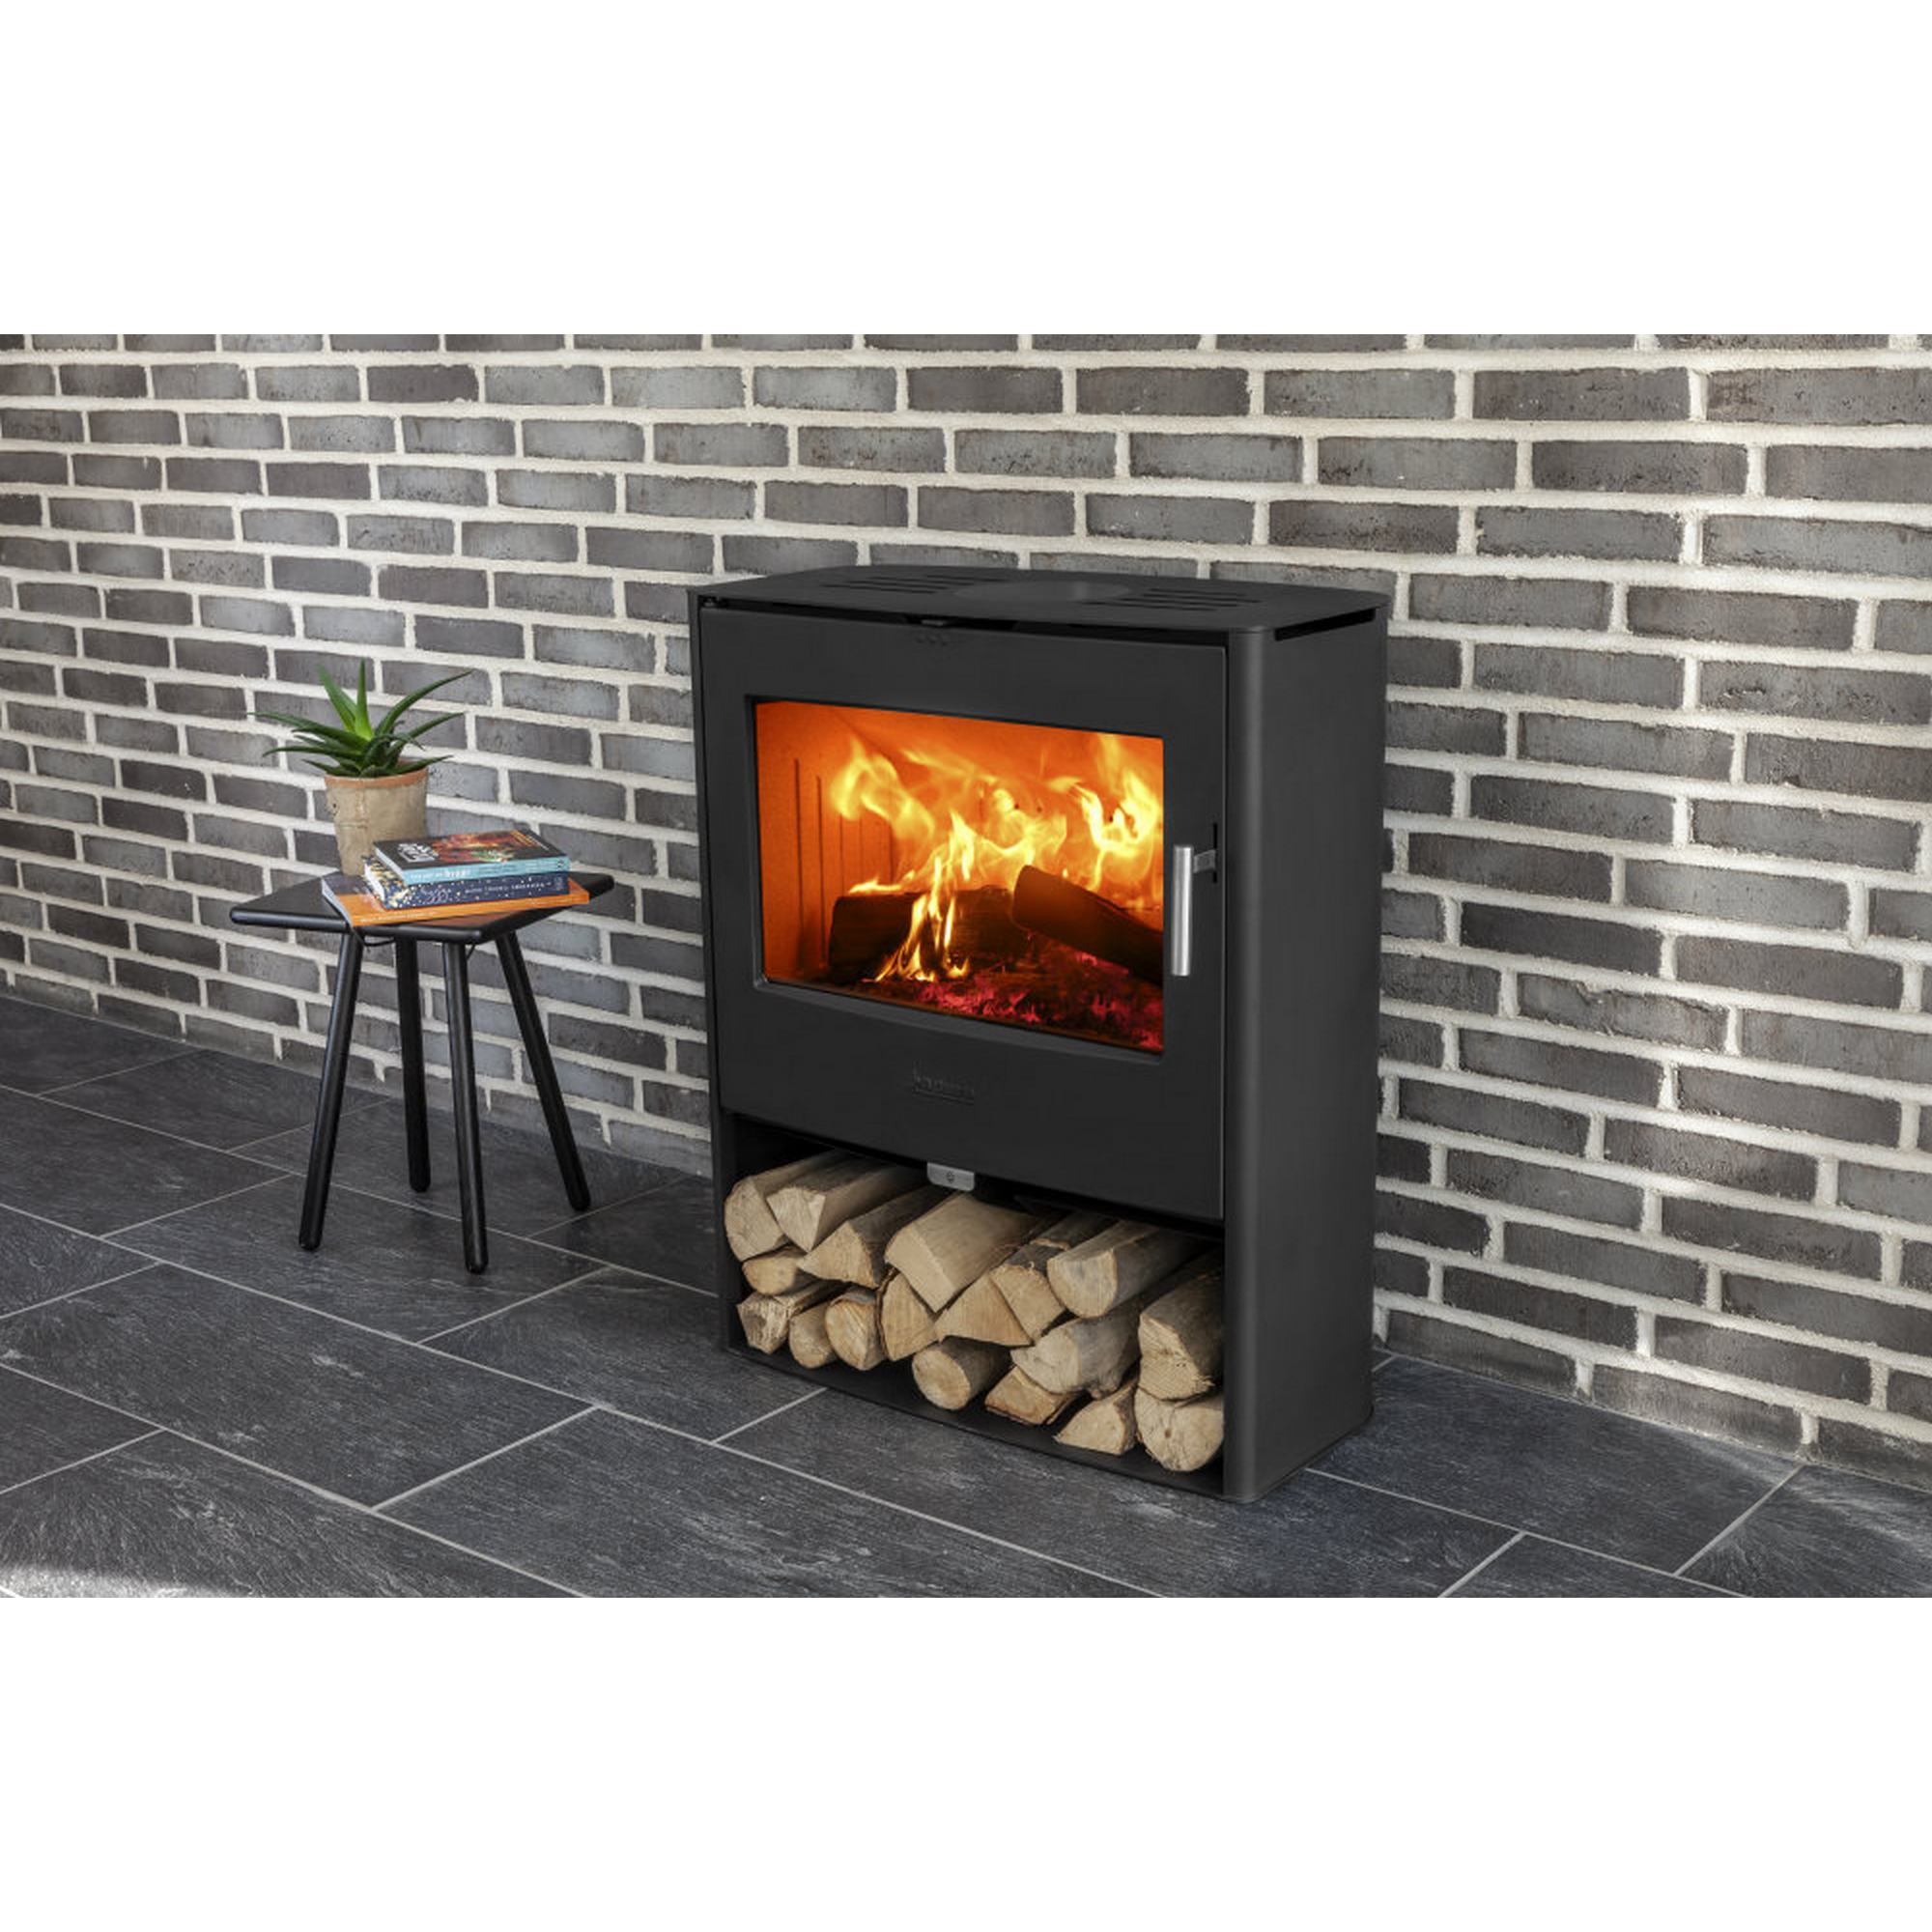 Kaminofen '20' Stahl 6,5 kW + product picture